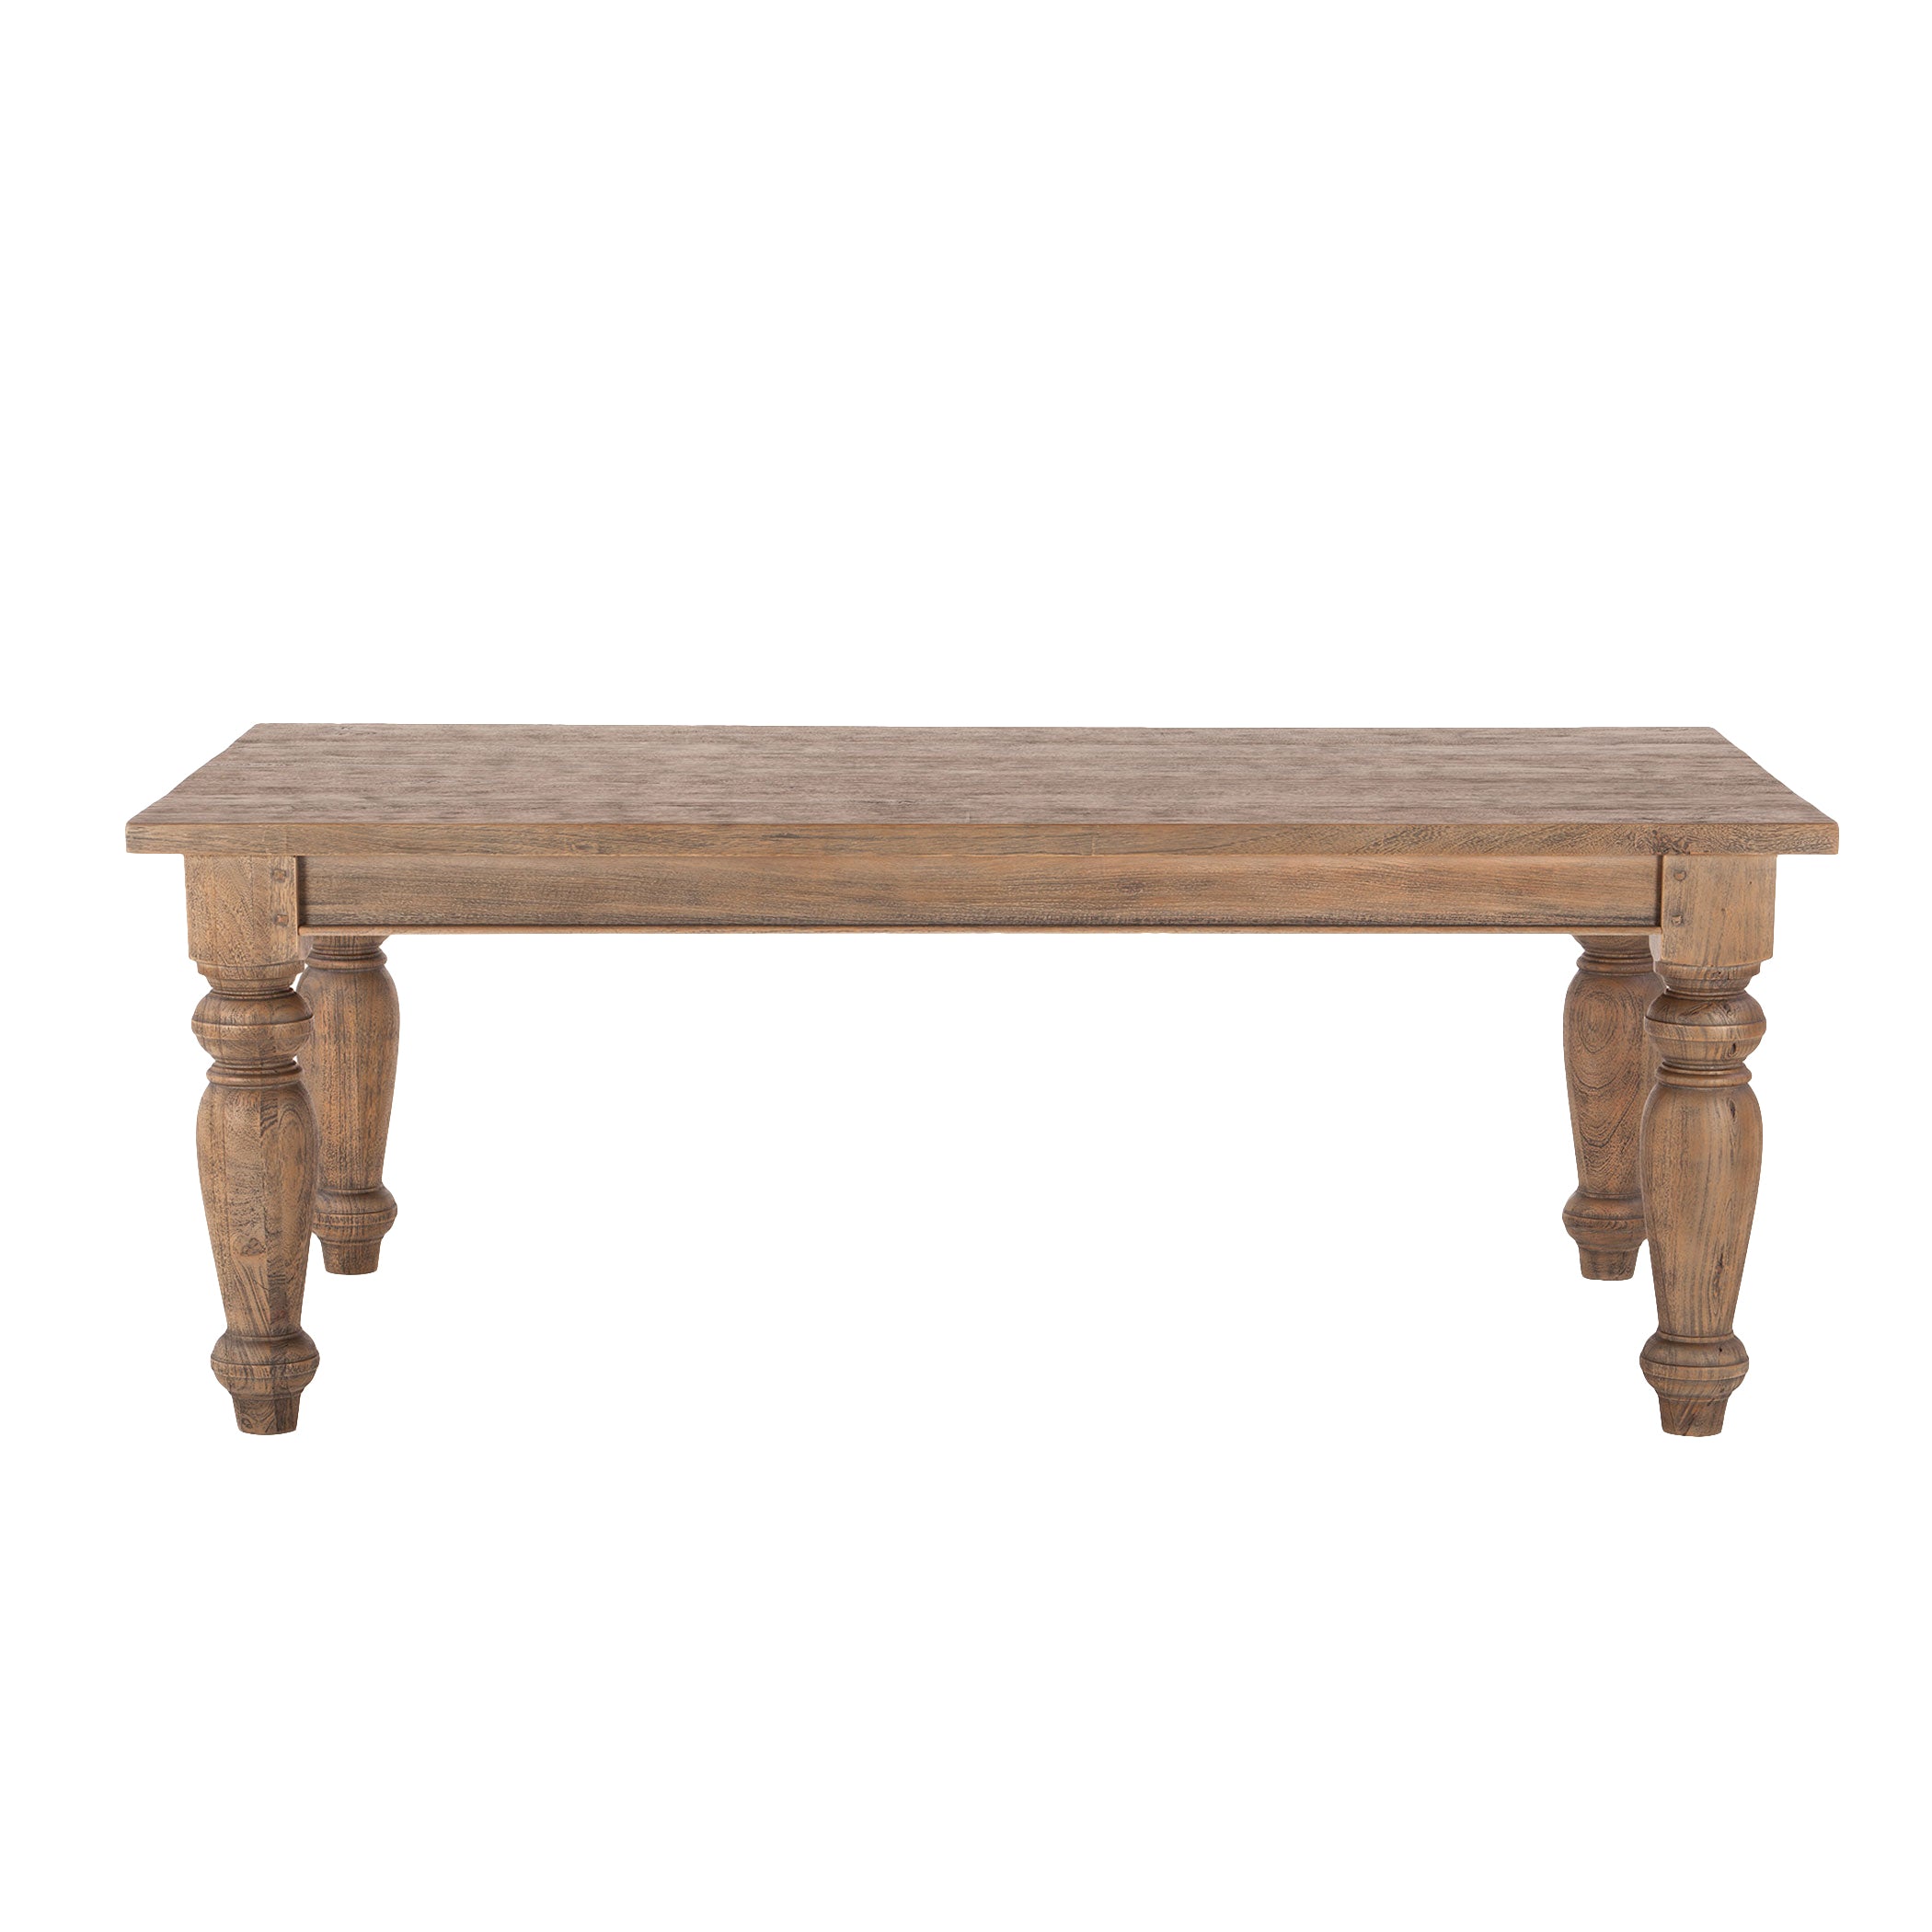 Chatham Downs Dining Table